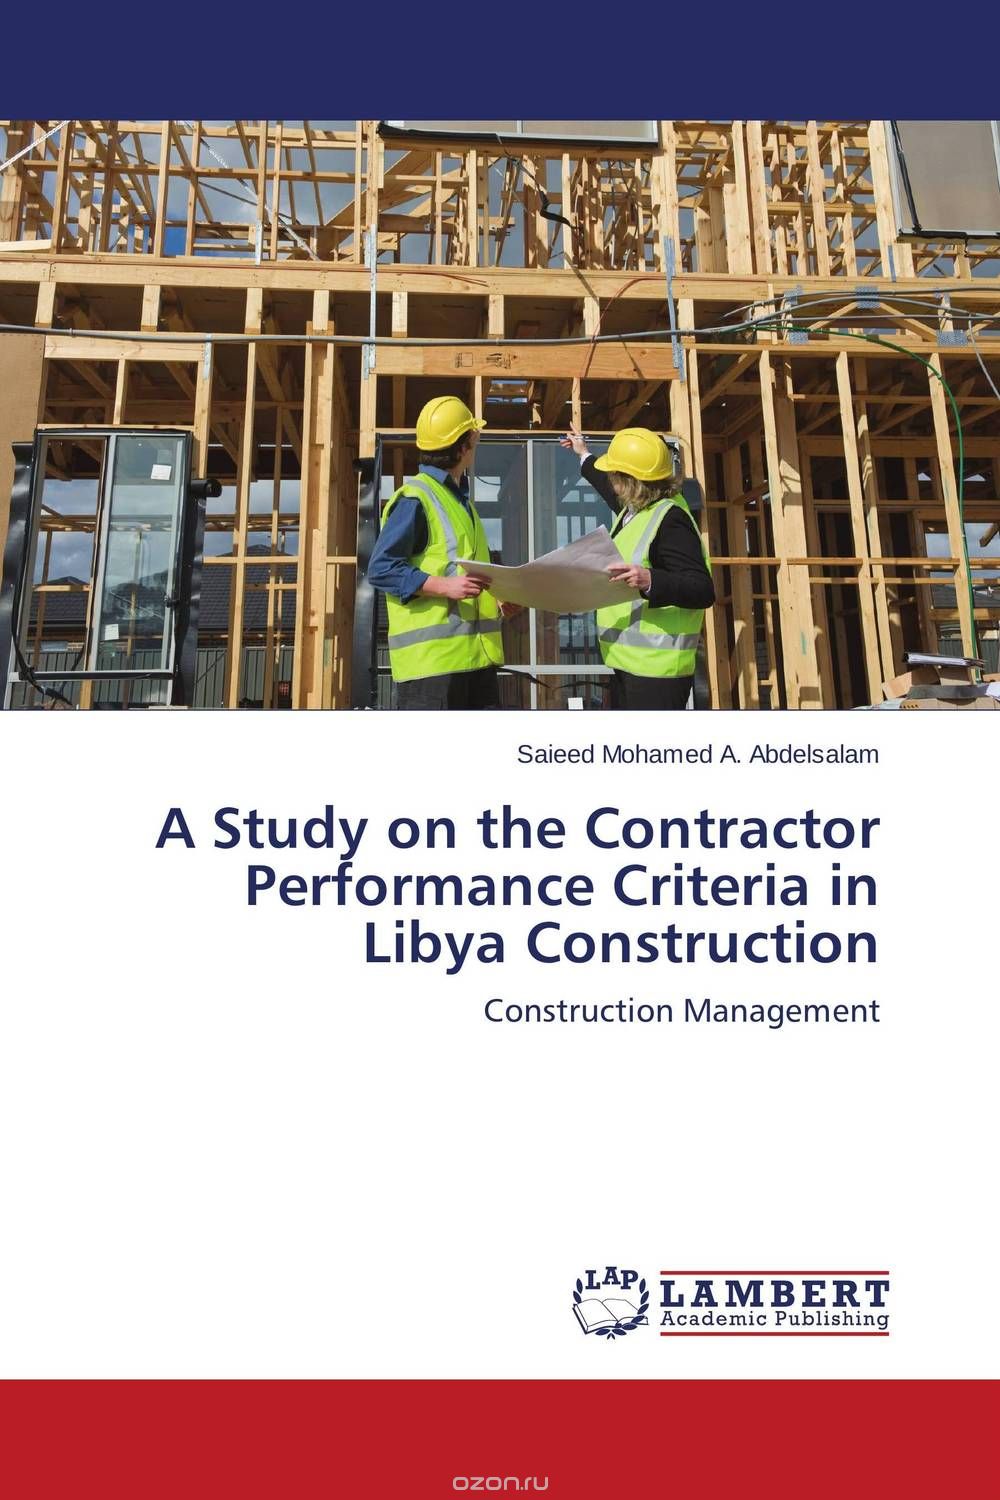 A Study on the Contractor Performance Criteria in Libya Construction